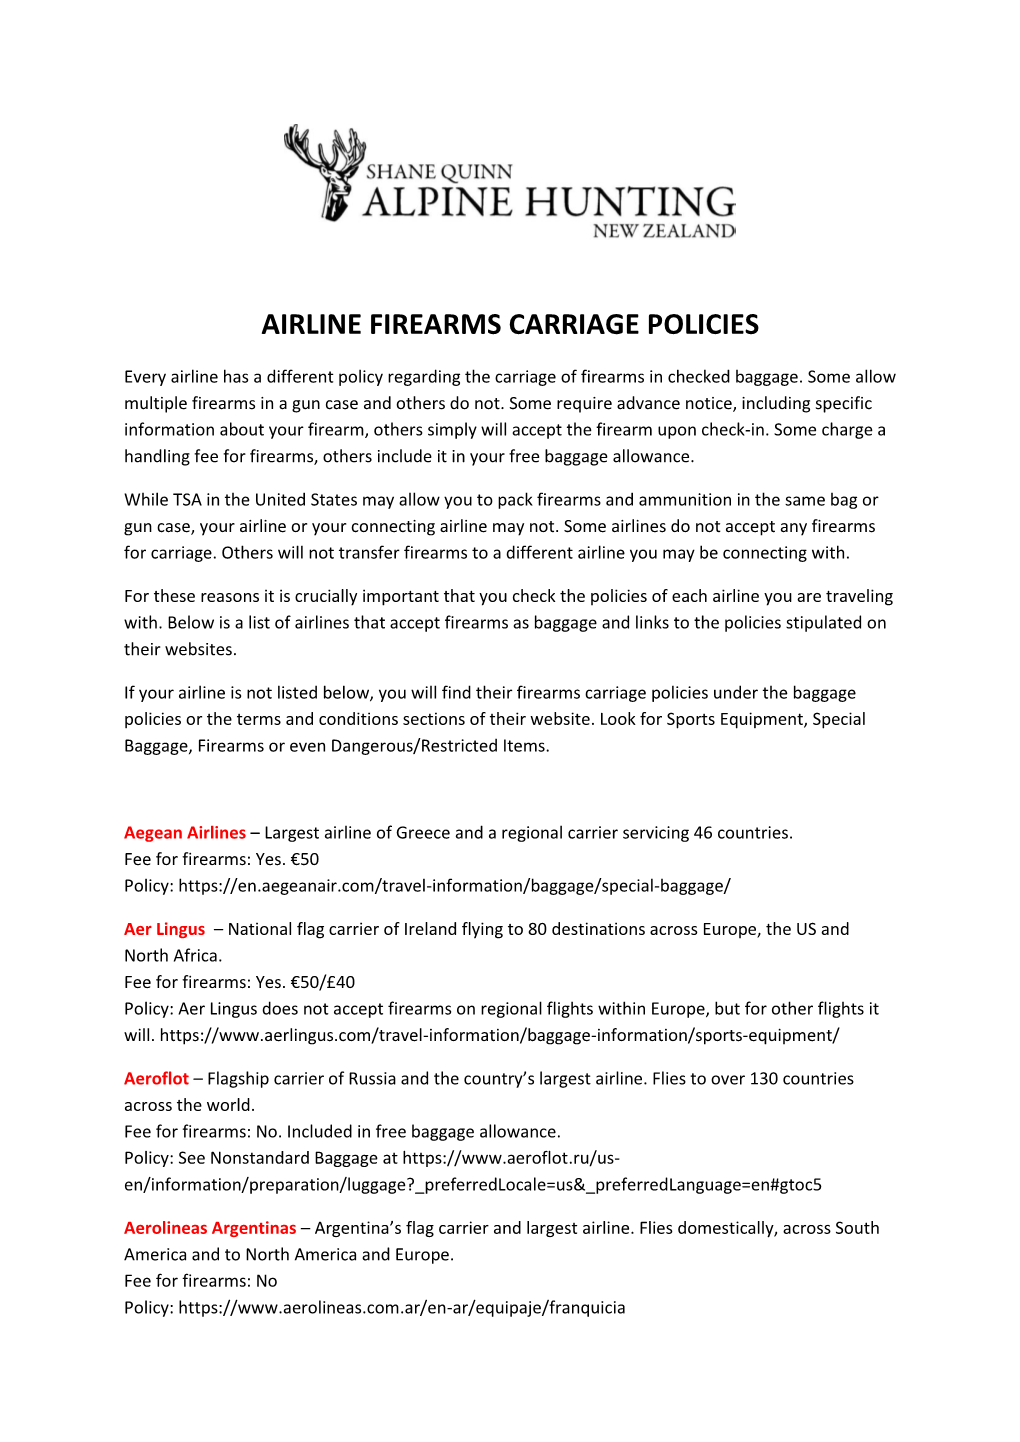 Airline Firearms Carriage Policies